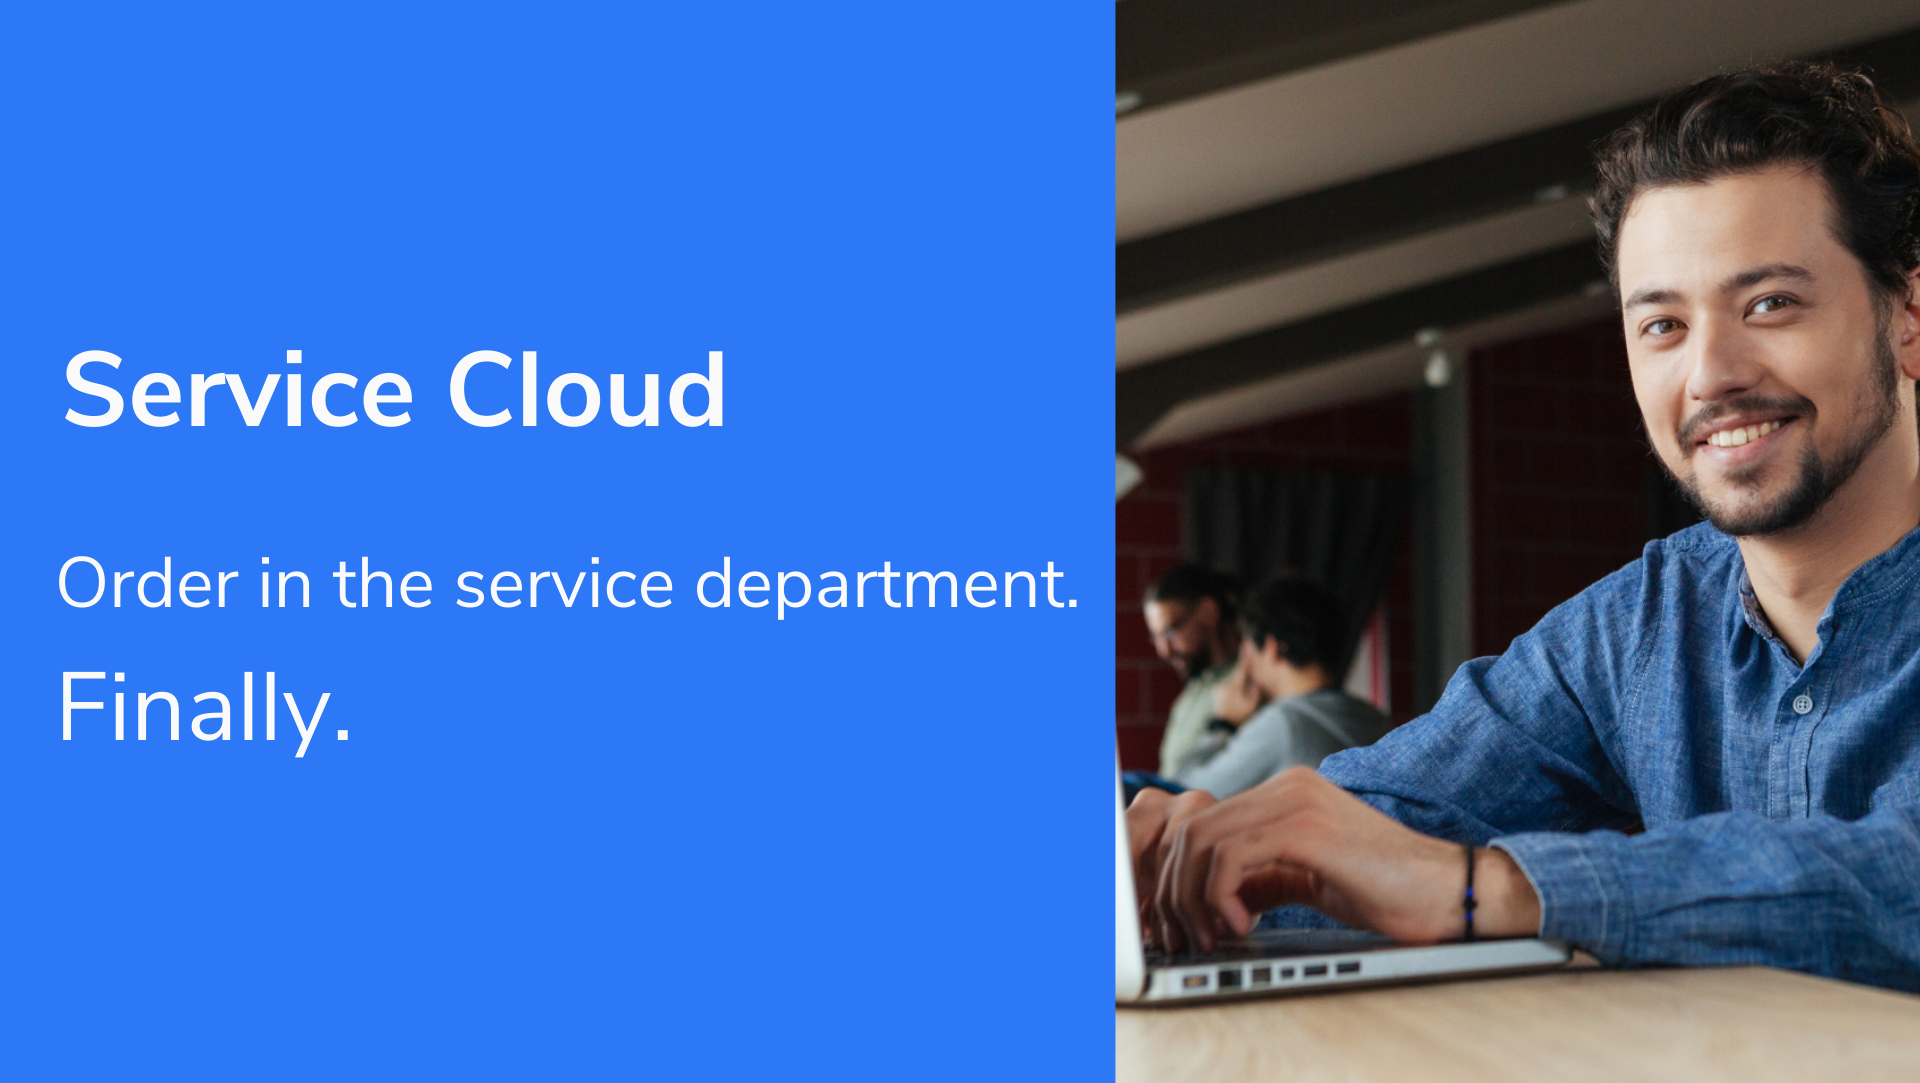 Service Cloud – order in the service department. Finally.